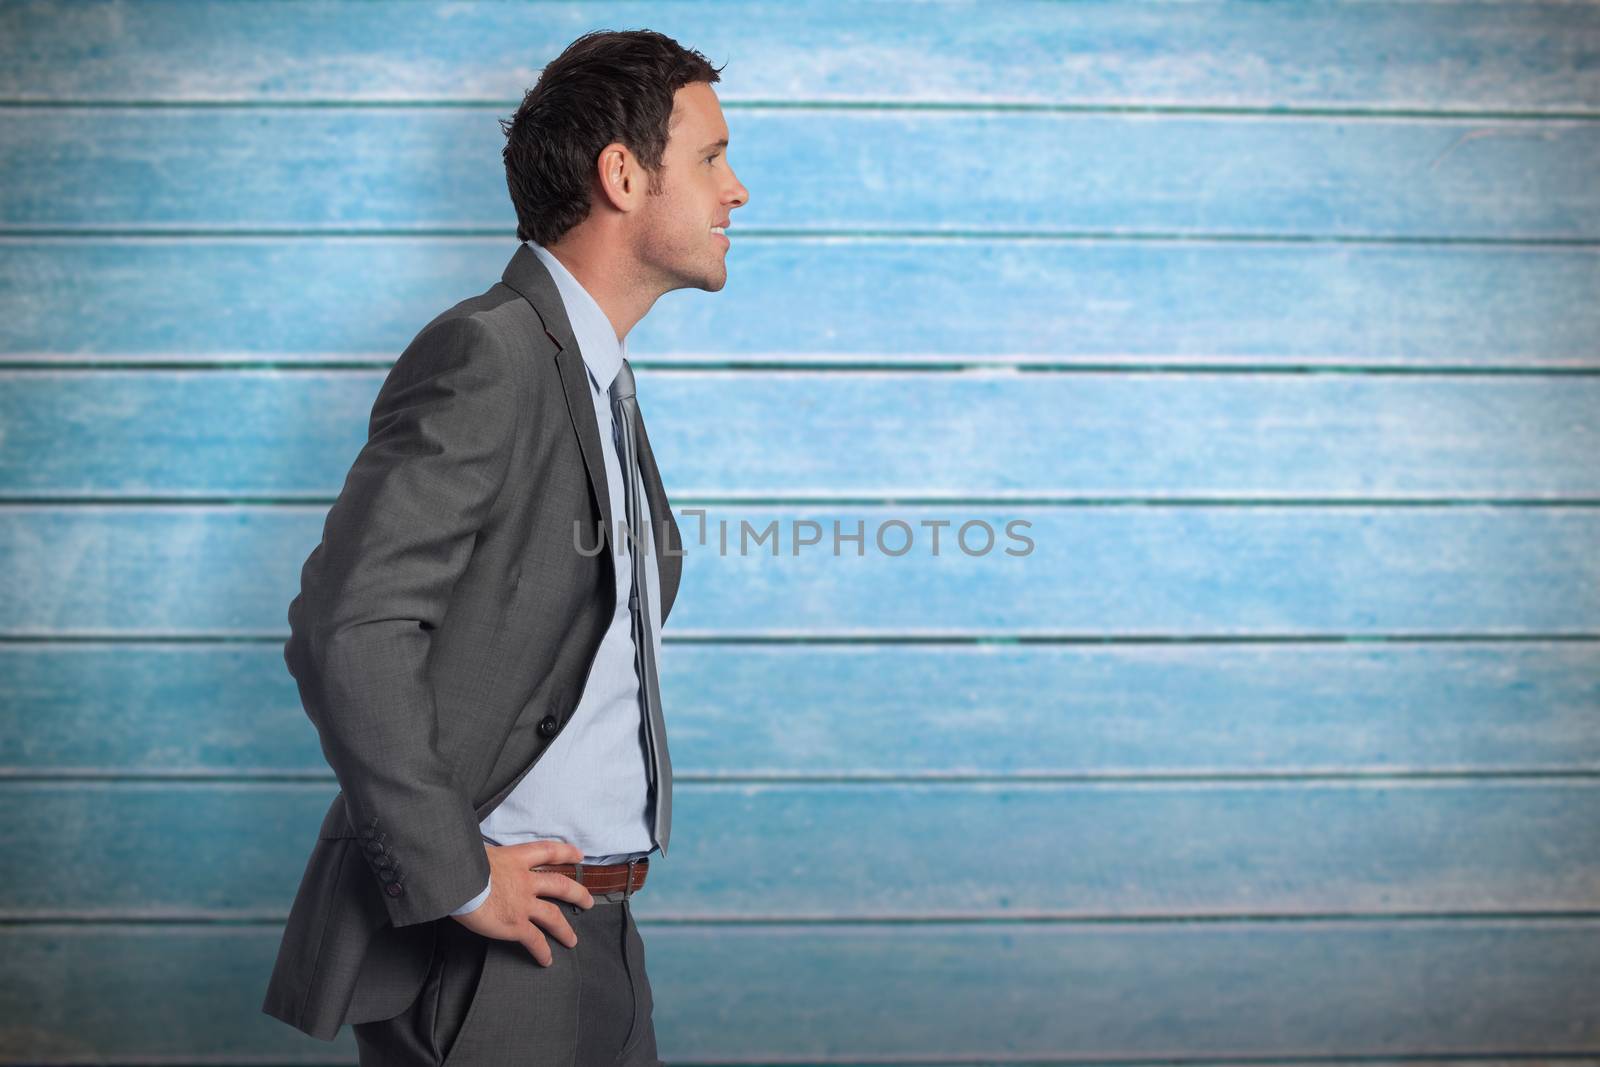 Smiling businessman with hands on hips against wooden planks